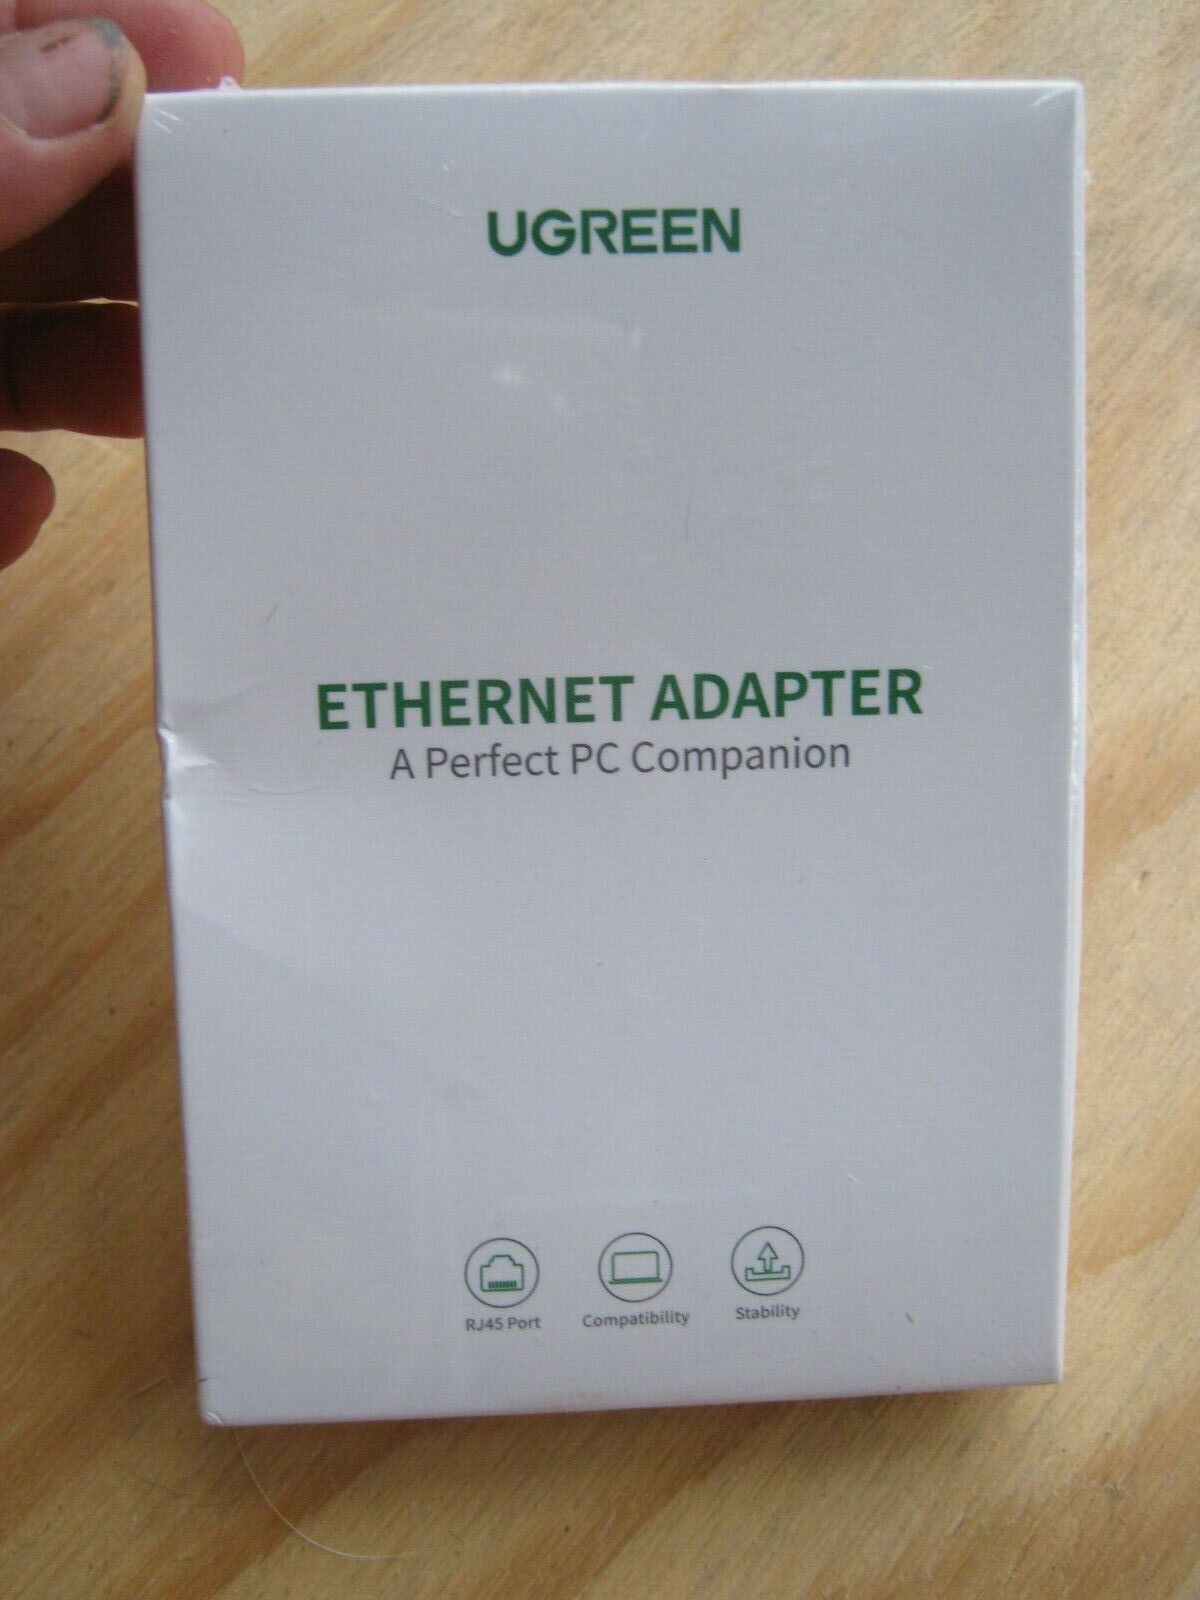 UGREEN Ethernet Adapter 20254 USB 2.0 to 10 for PC or Laptop New & Sealed